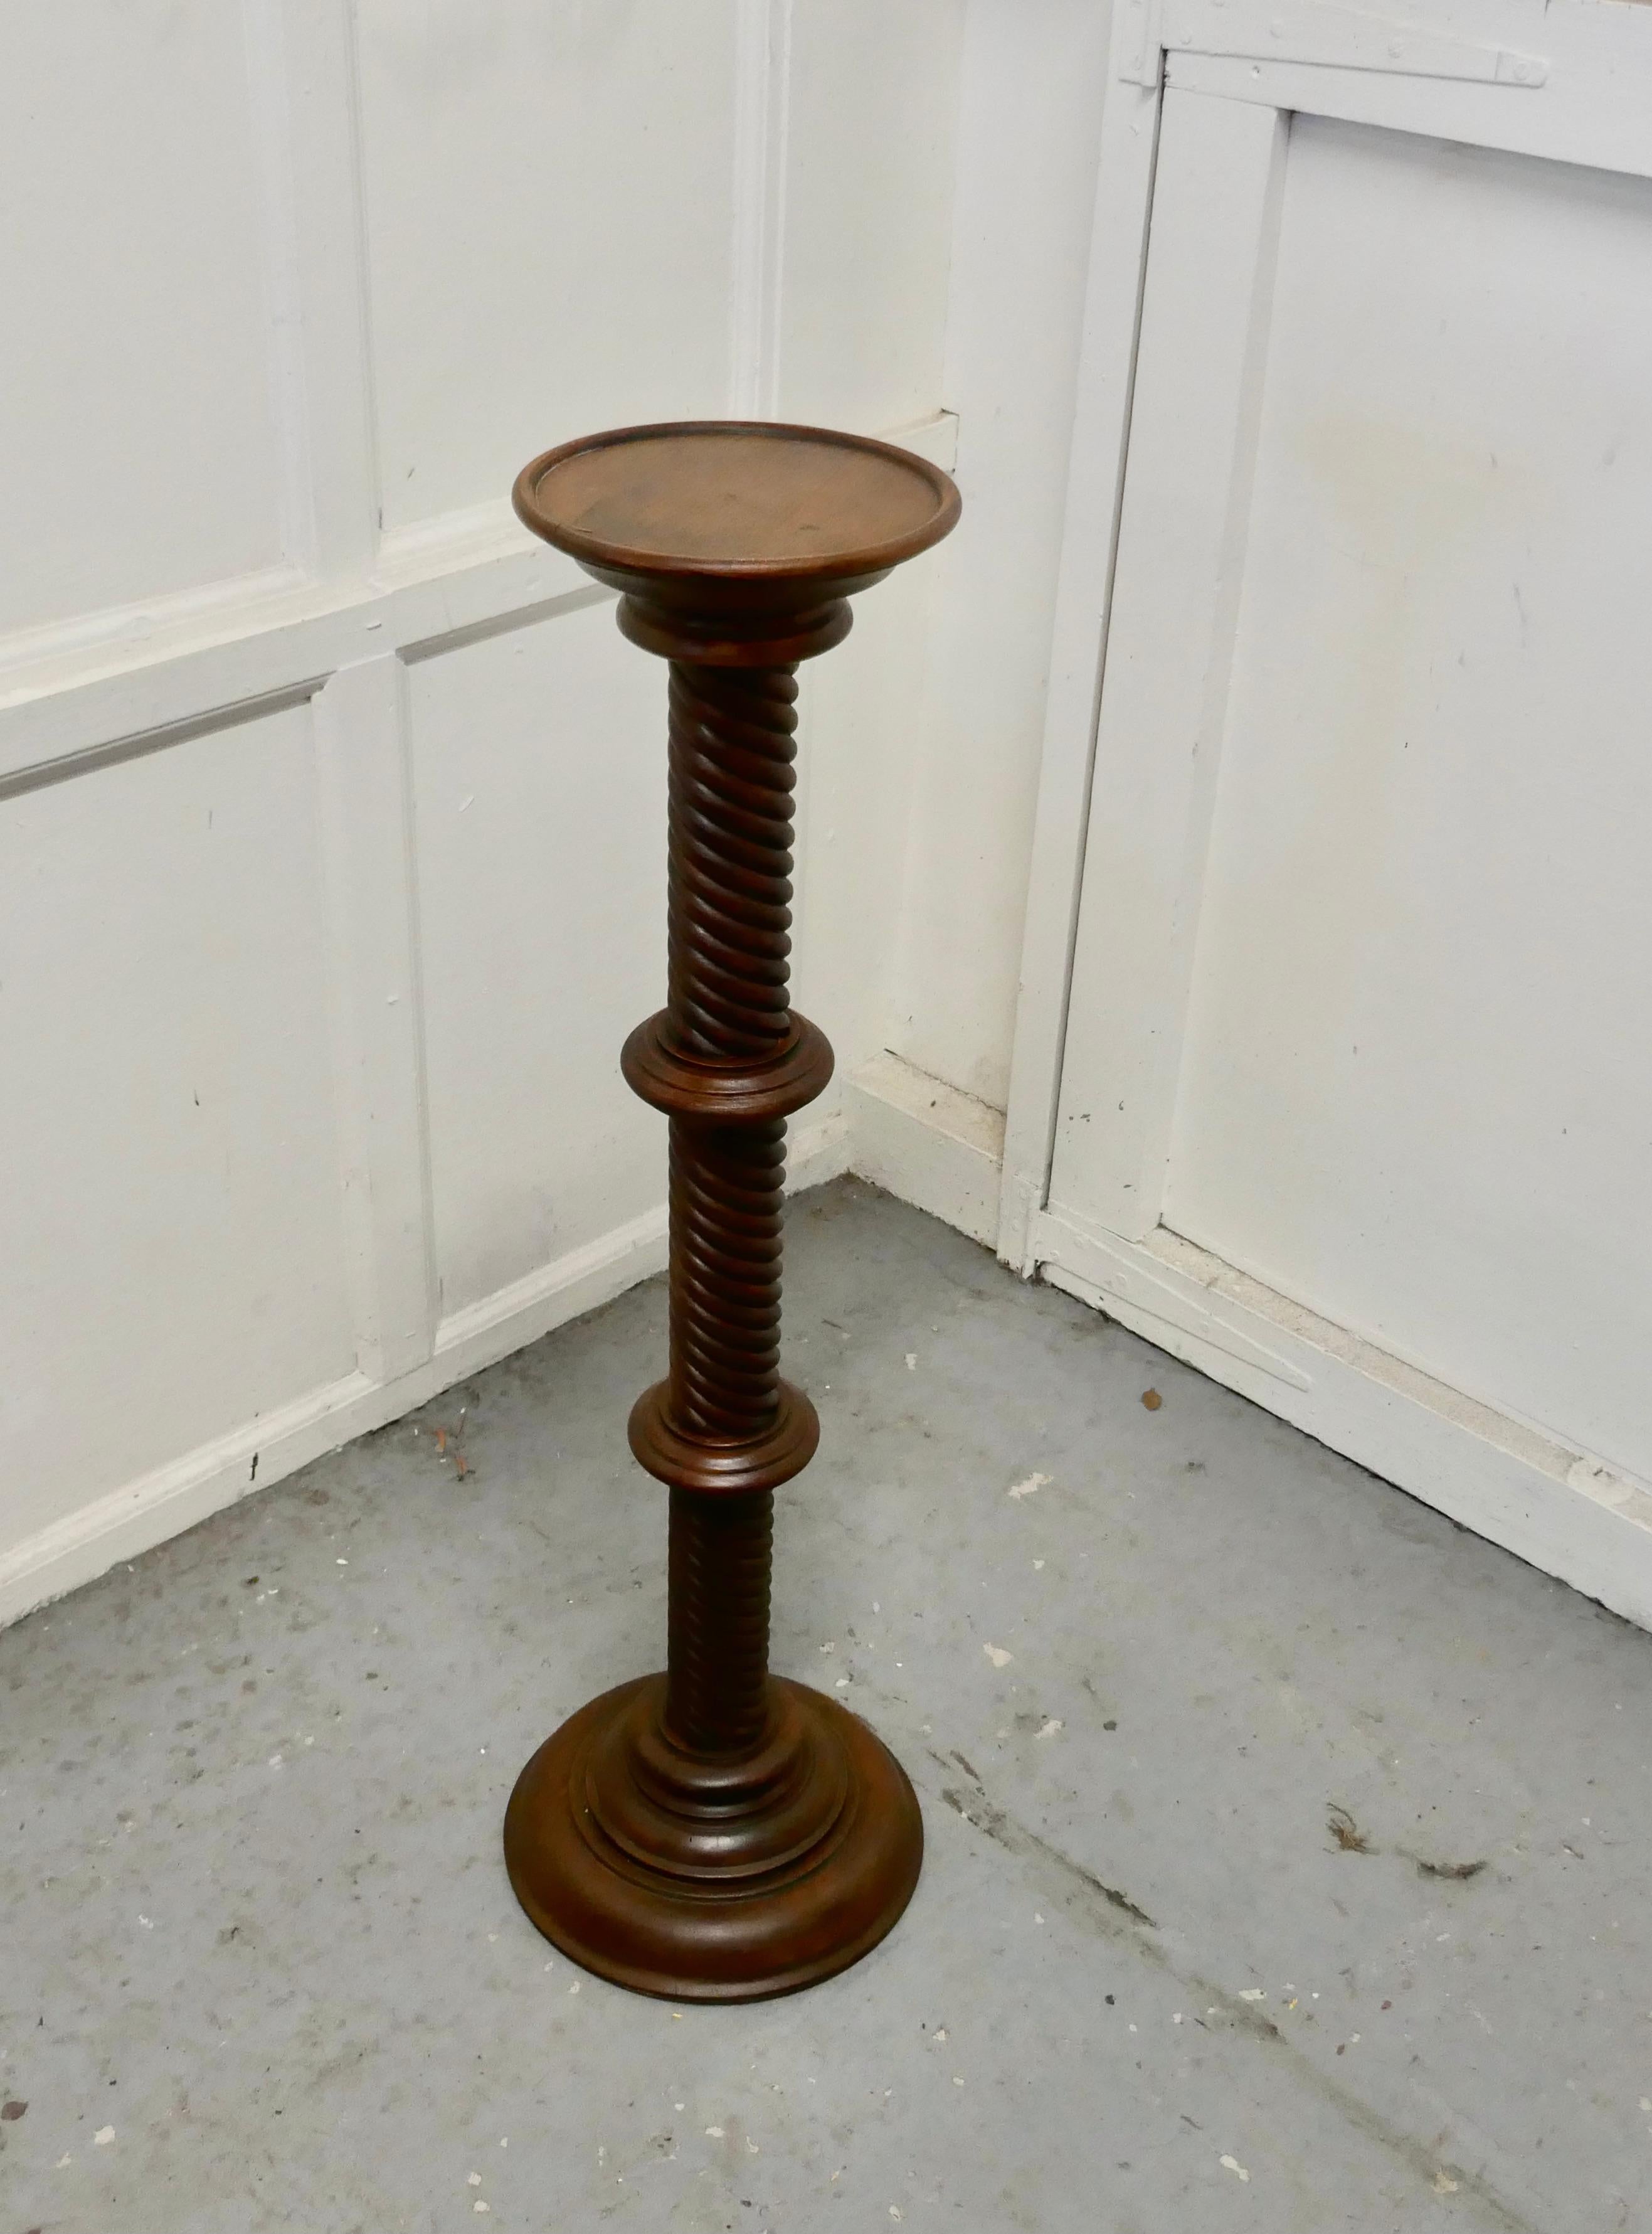 19th century carved mahogany pedestal torchere

The column has a tight barley twist turning, both top and bottom are round, the top has a small lip and the base is stepped 
The column is in the Classical style and has a multitude of uses, for a